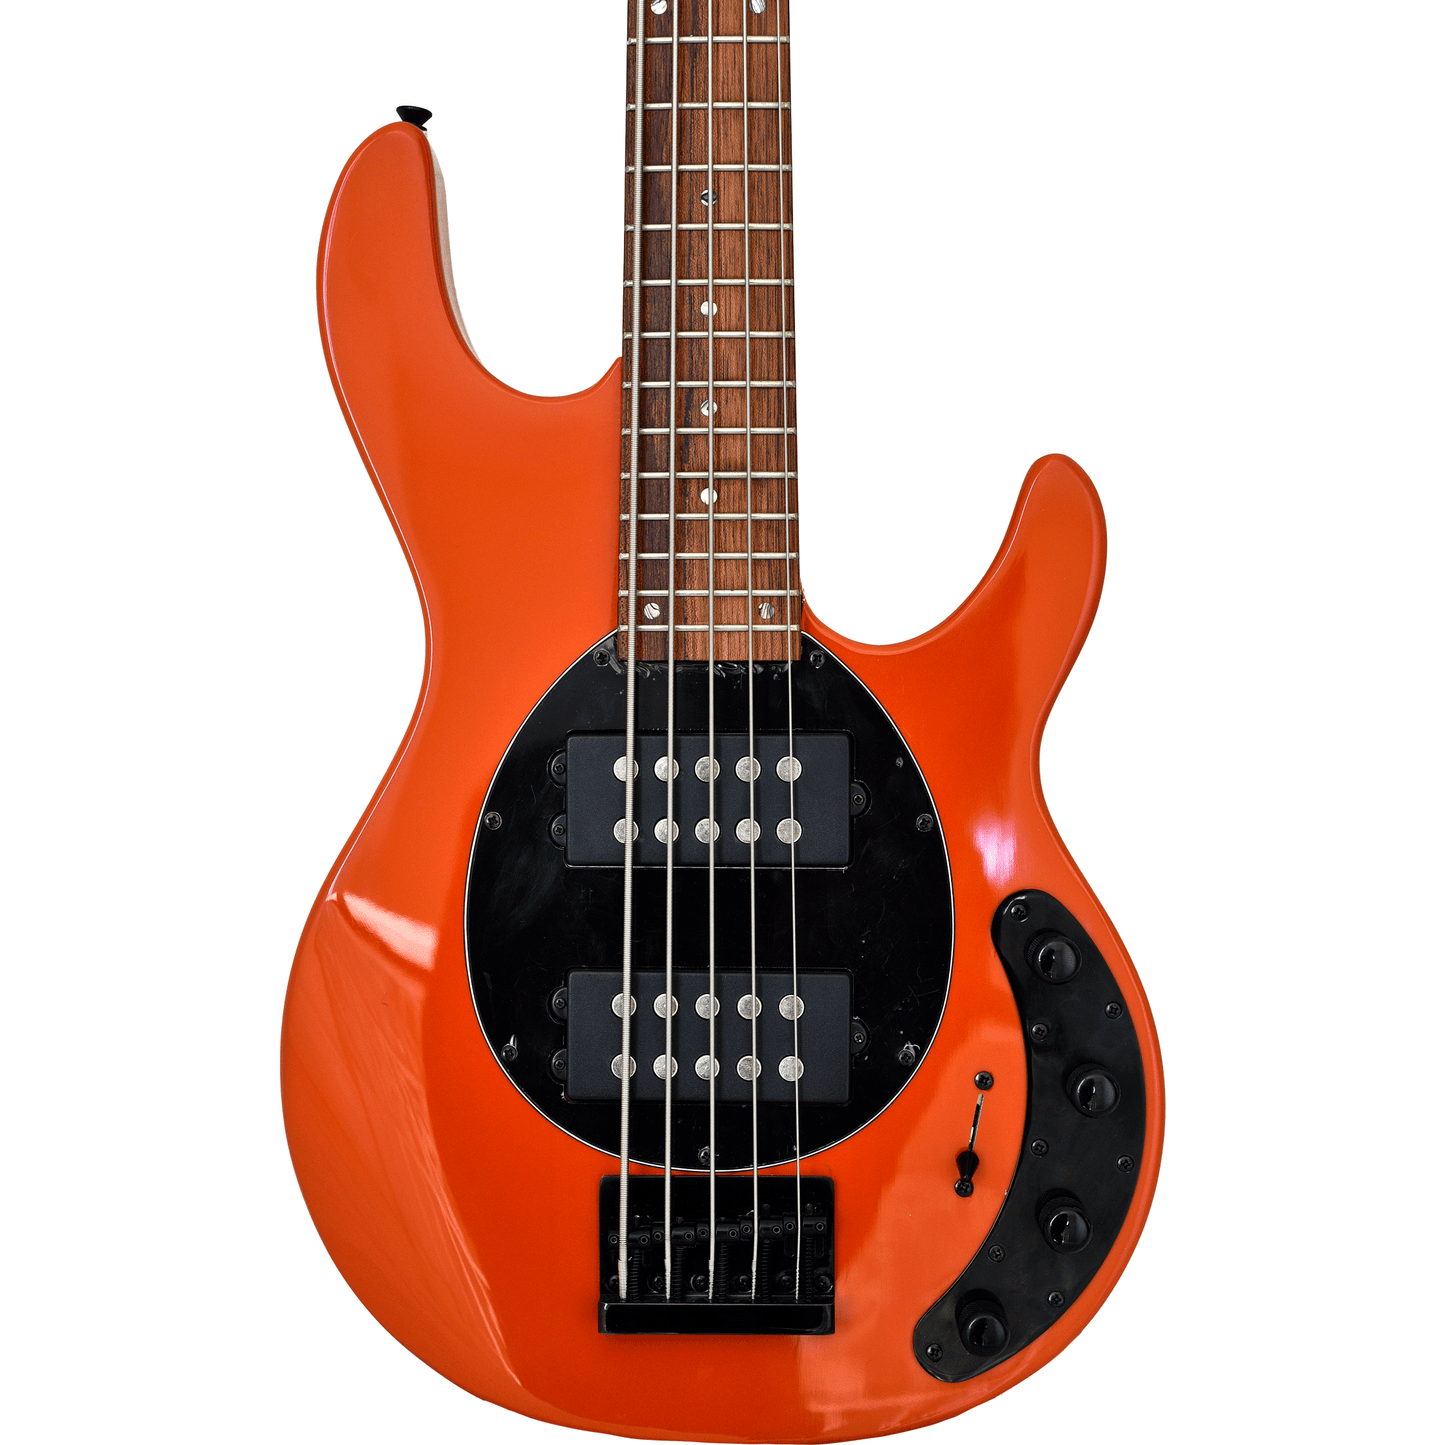 Moonray-5 Orange Left or Right Hand With Hard Case